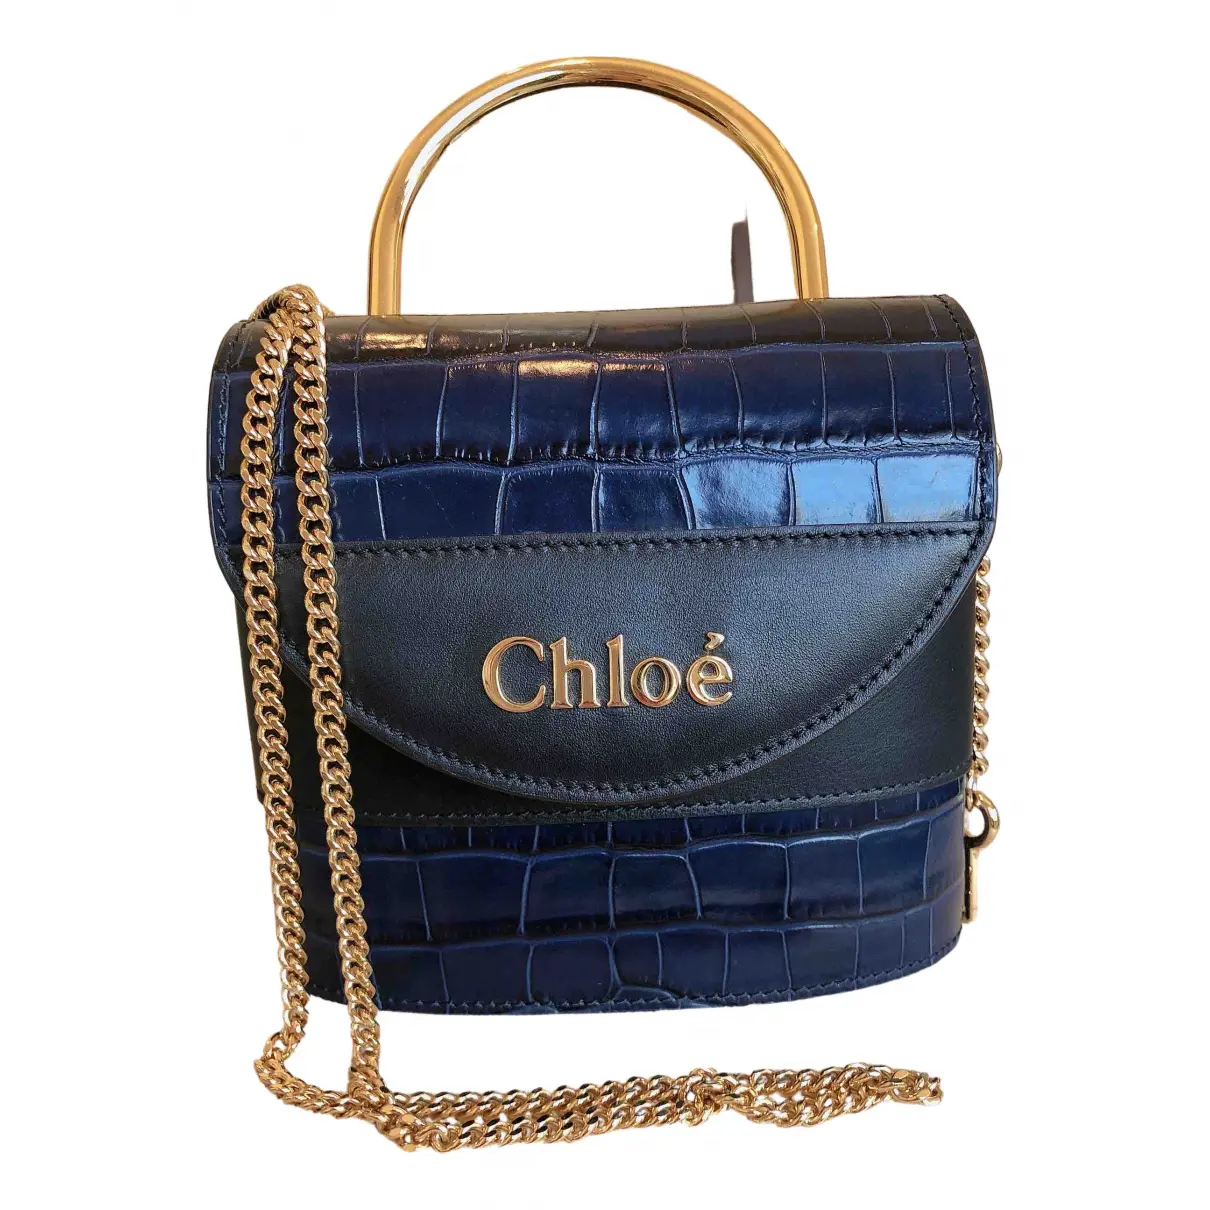 Aby leather bag Chloé